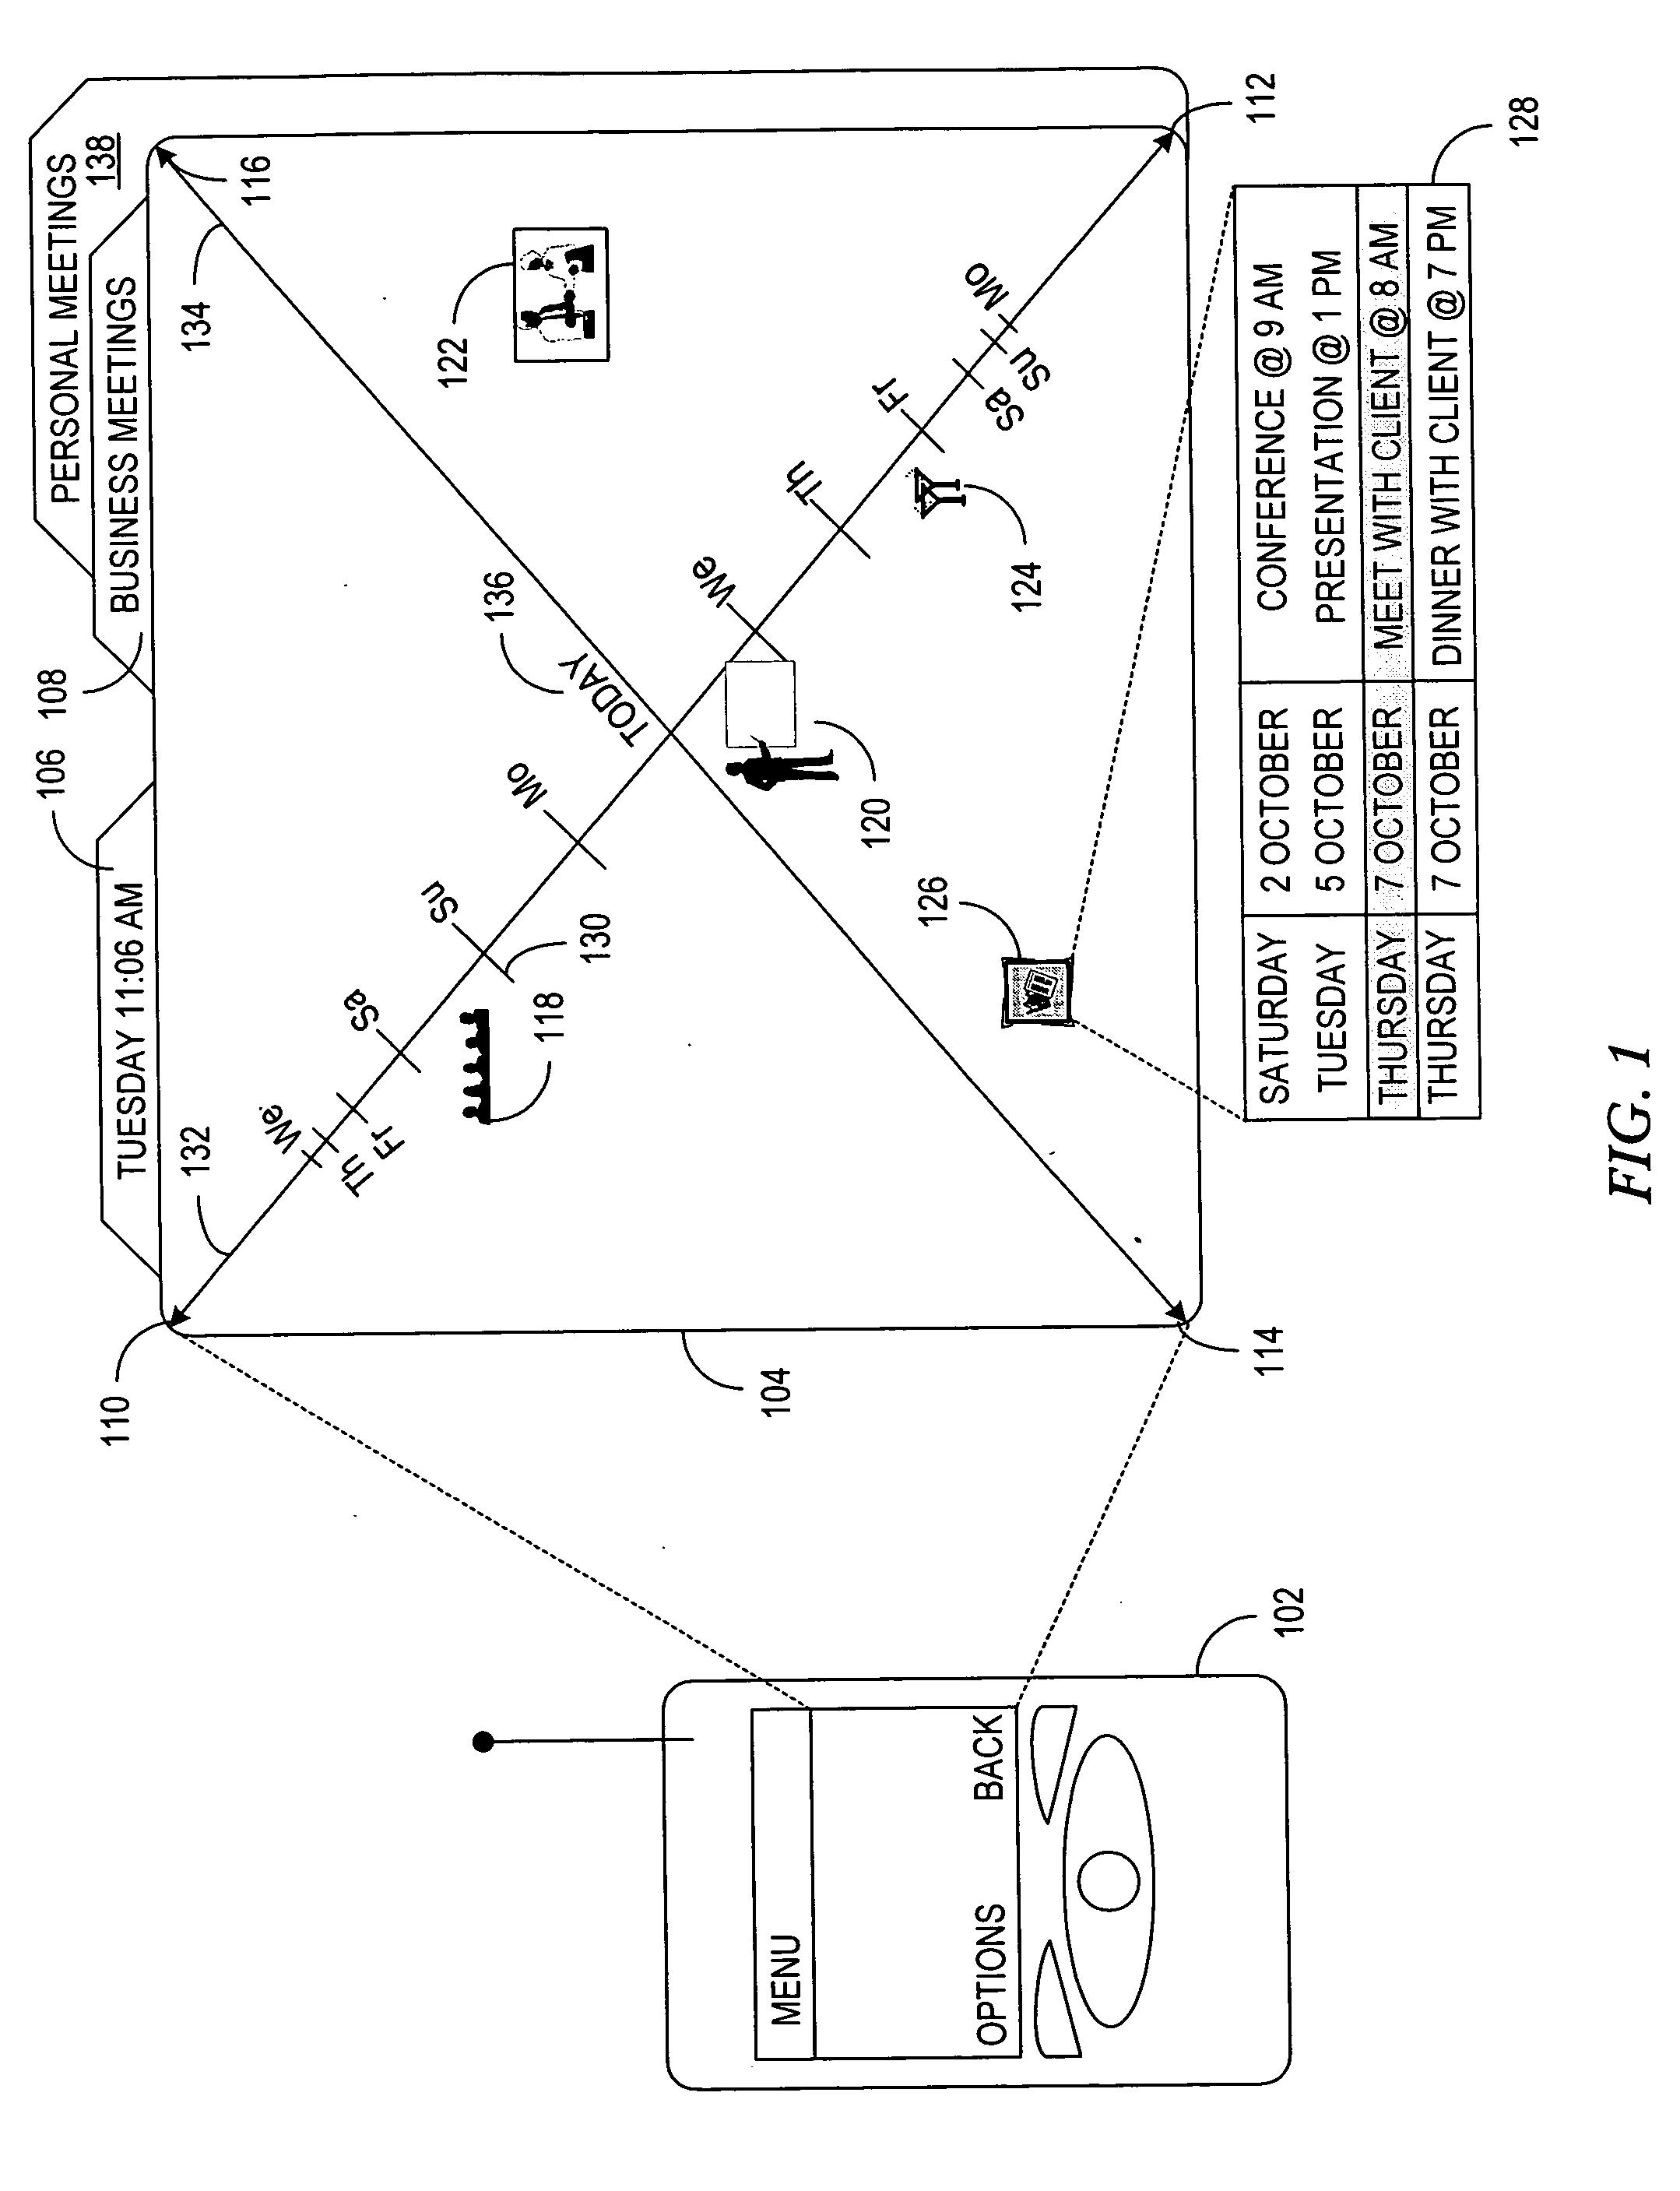 System, apparatus, and method for a singularity based user interface